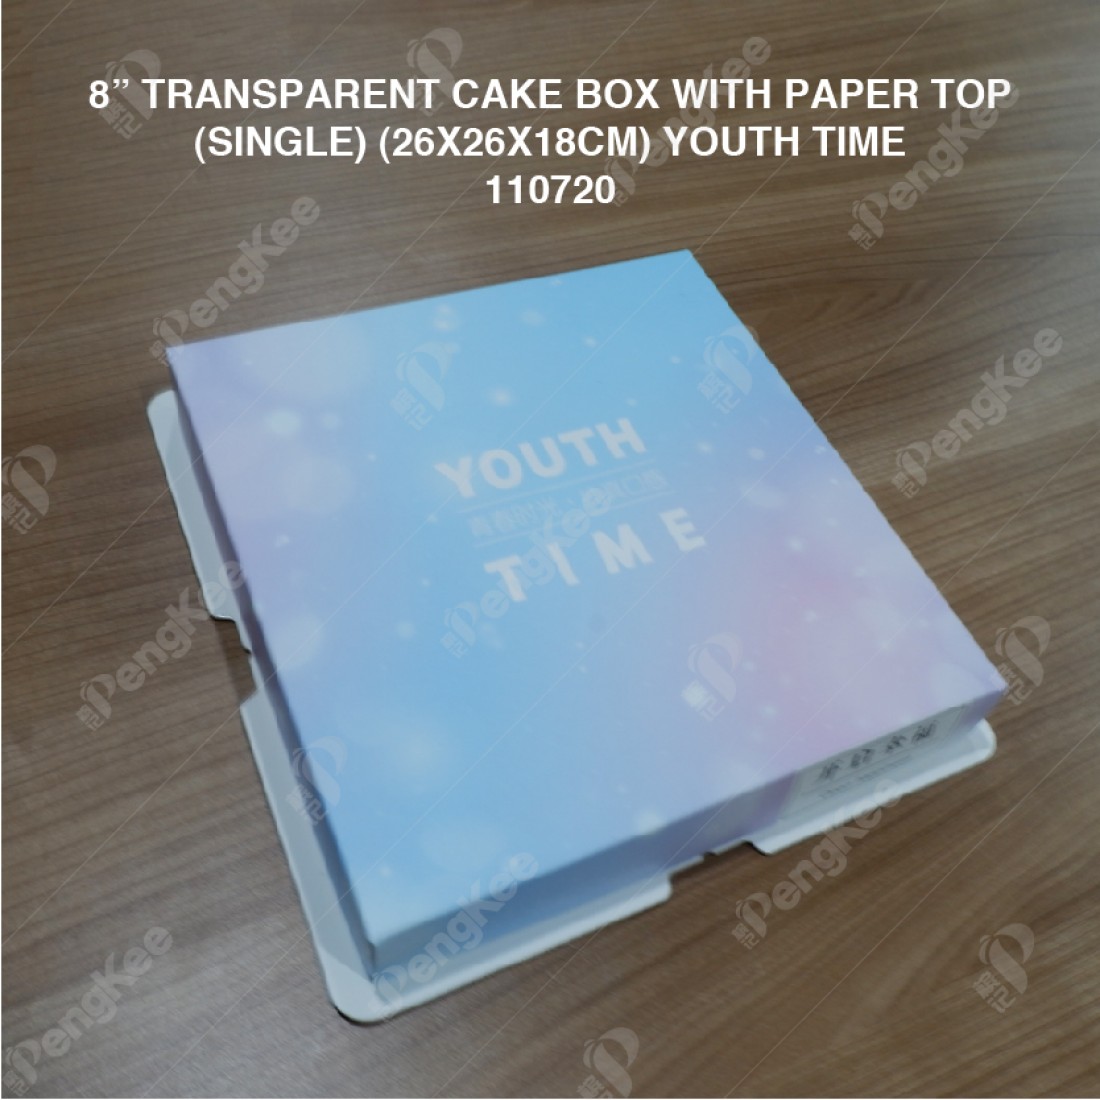 8" TRANSPARENT CAKE BOX WITH PAPER TOP(SINGLE) (26*26*18CM)- YOUTH TIME